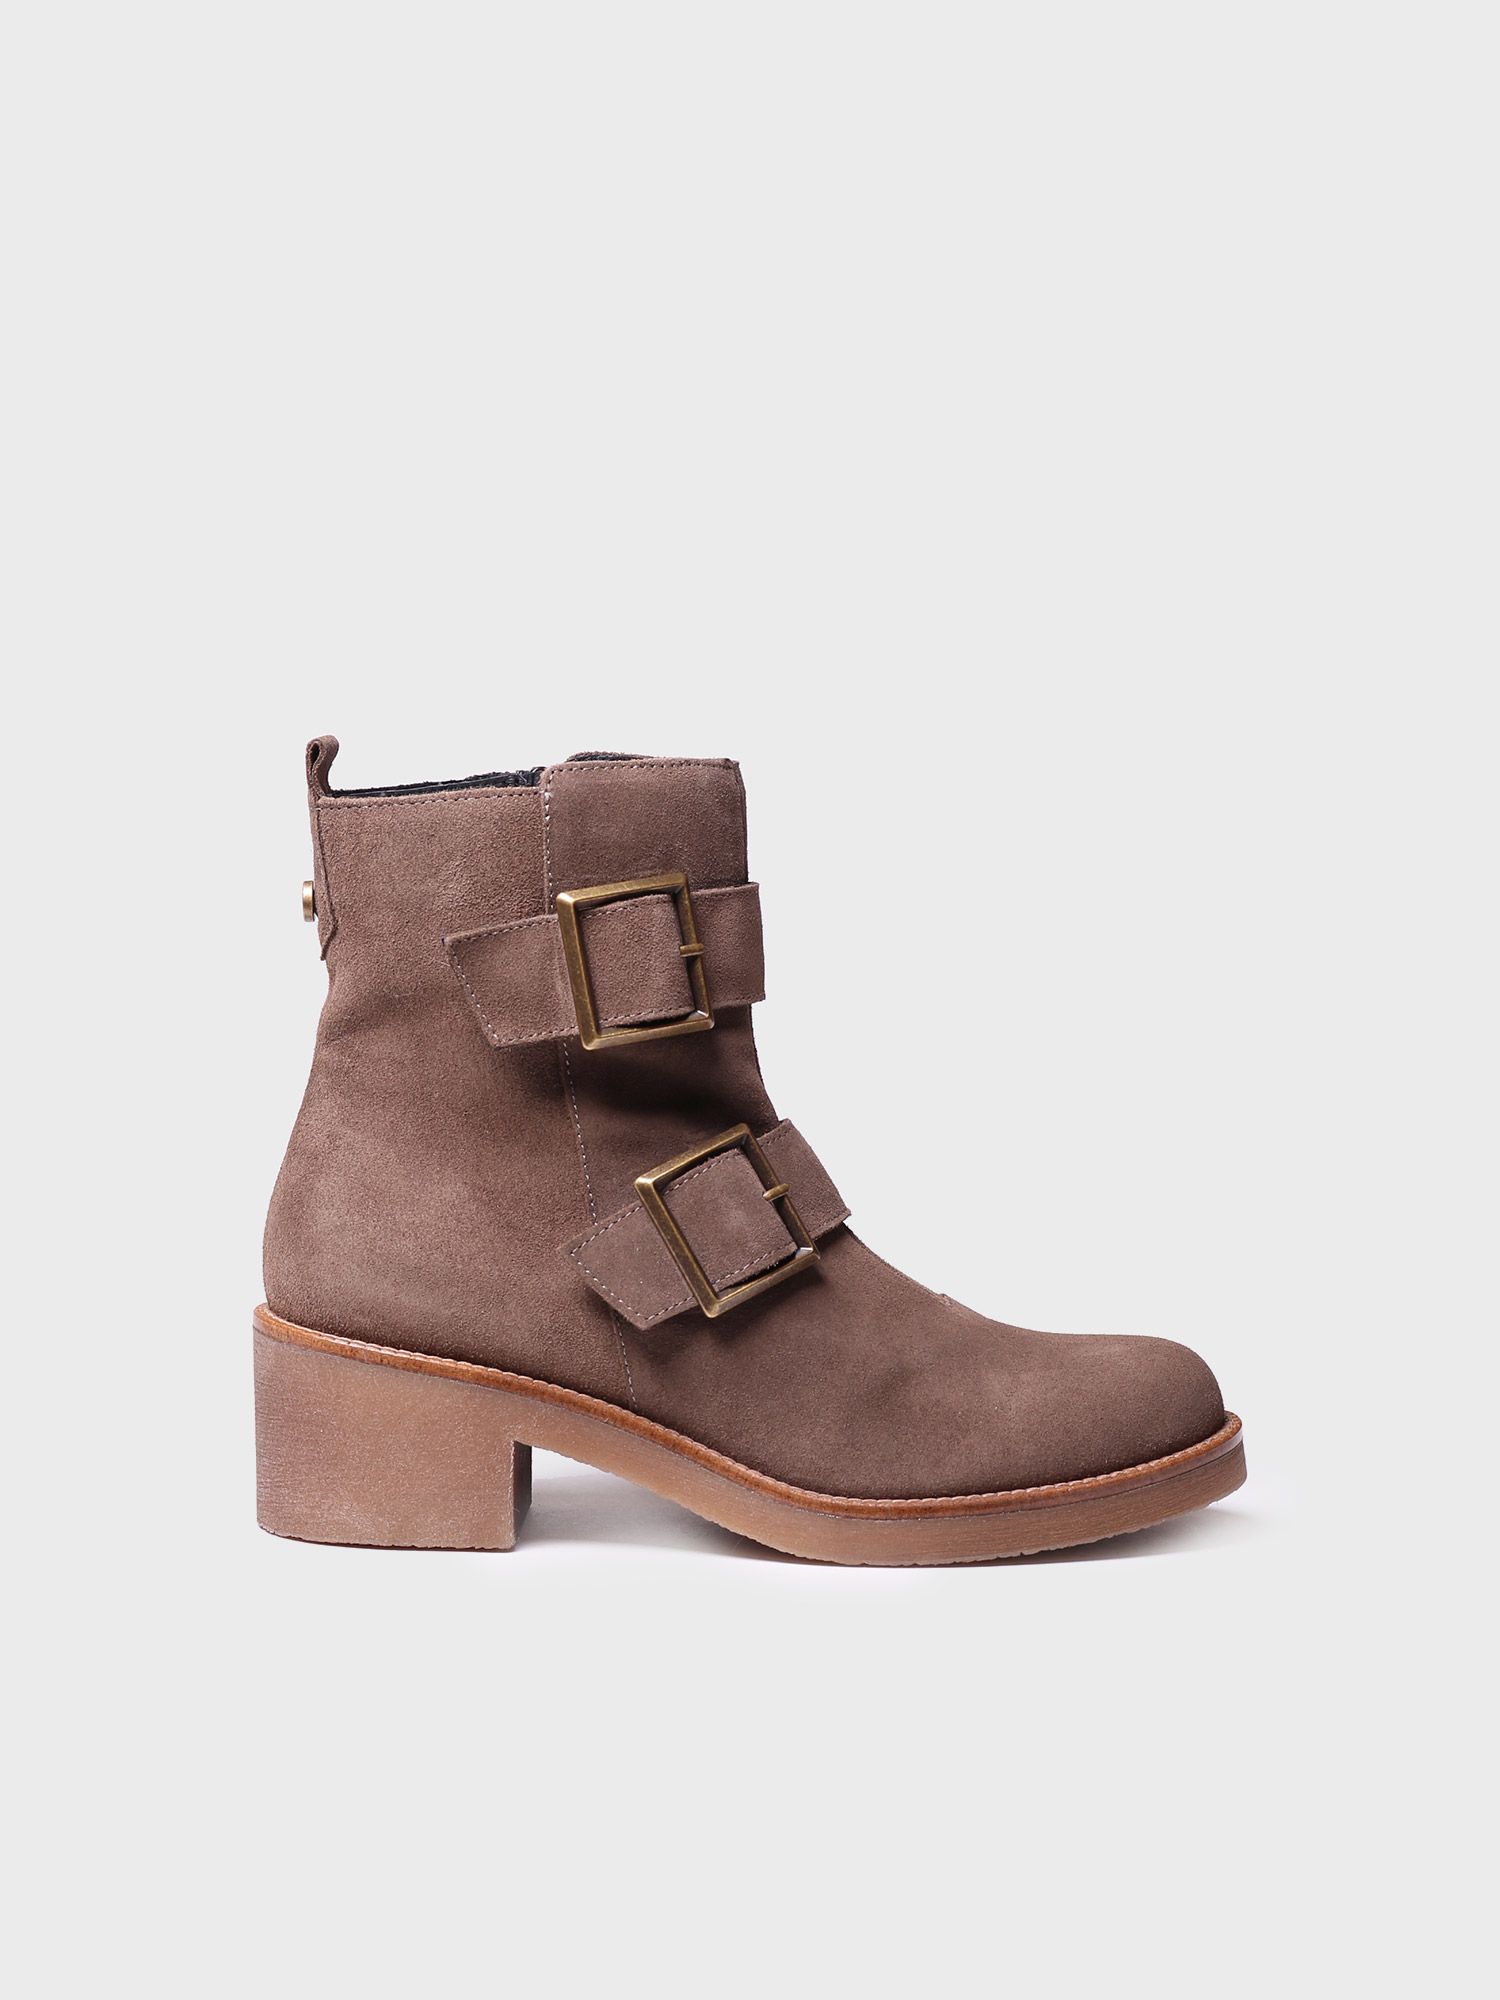 Women ankle boot made of suede - PETRA-SY